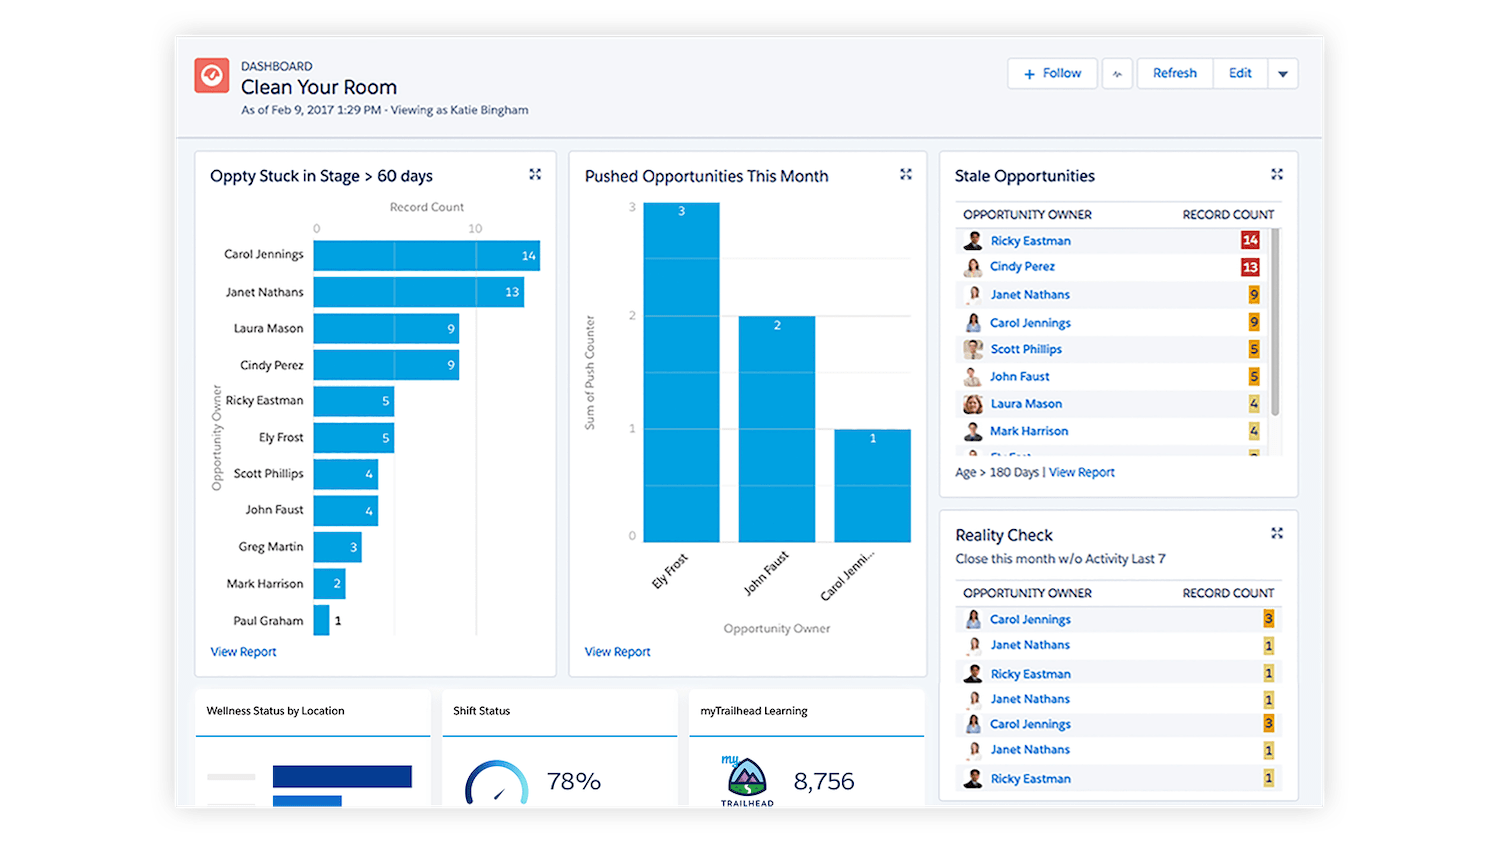 Clean Your Room dashboard in Salesforce Sales Cloud